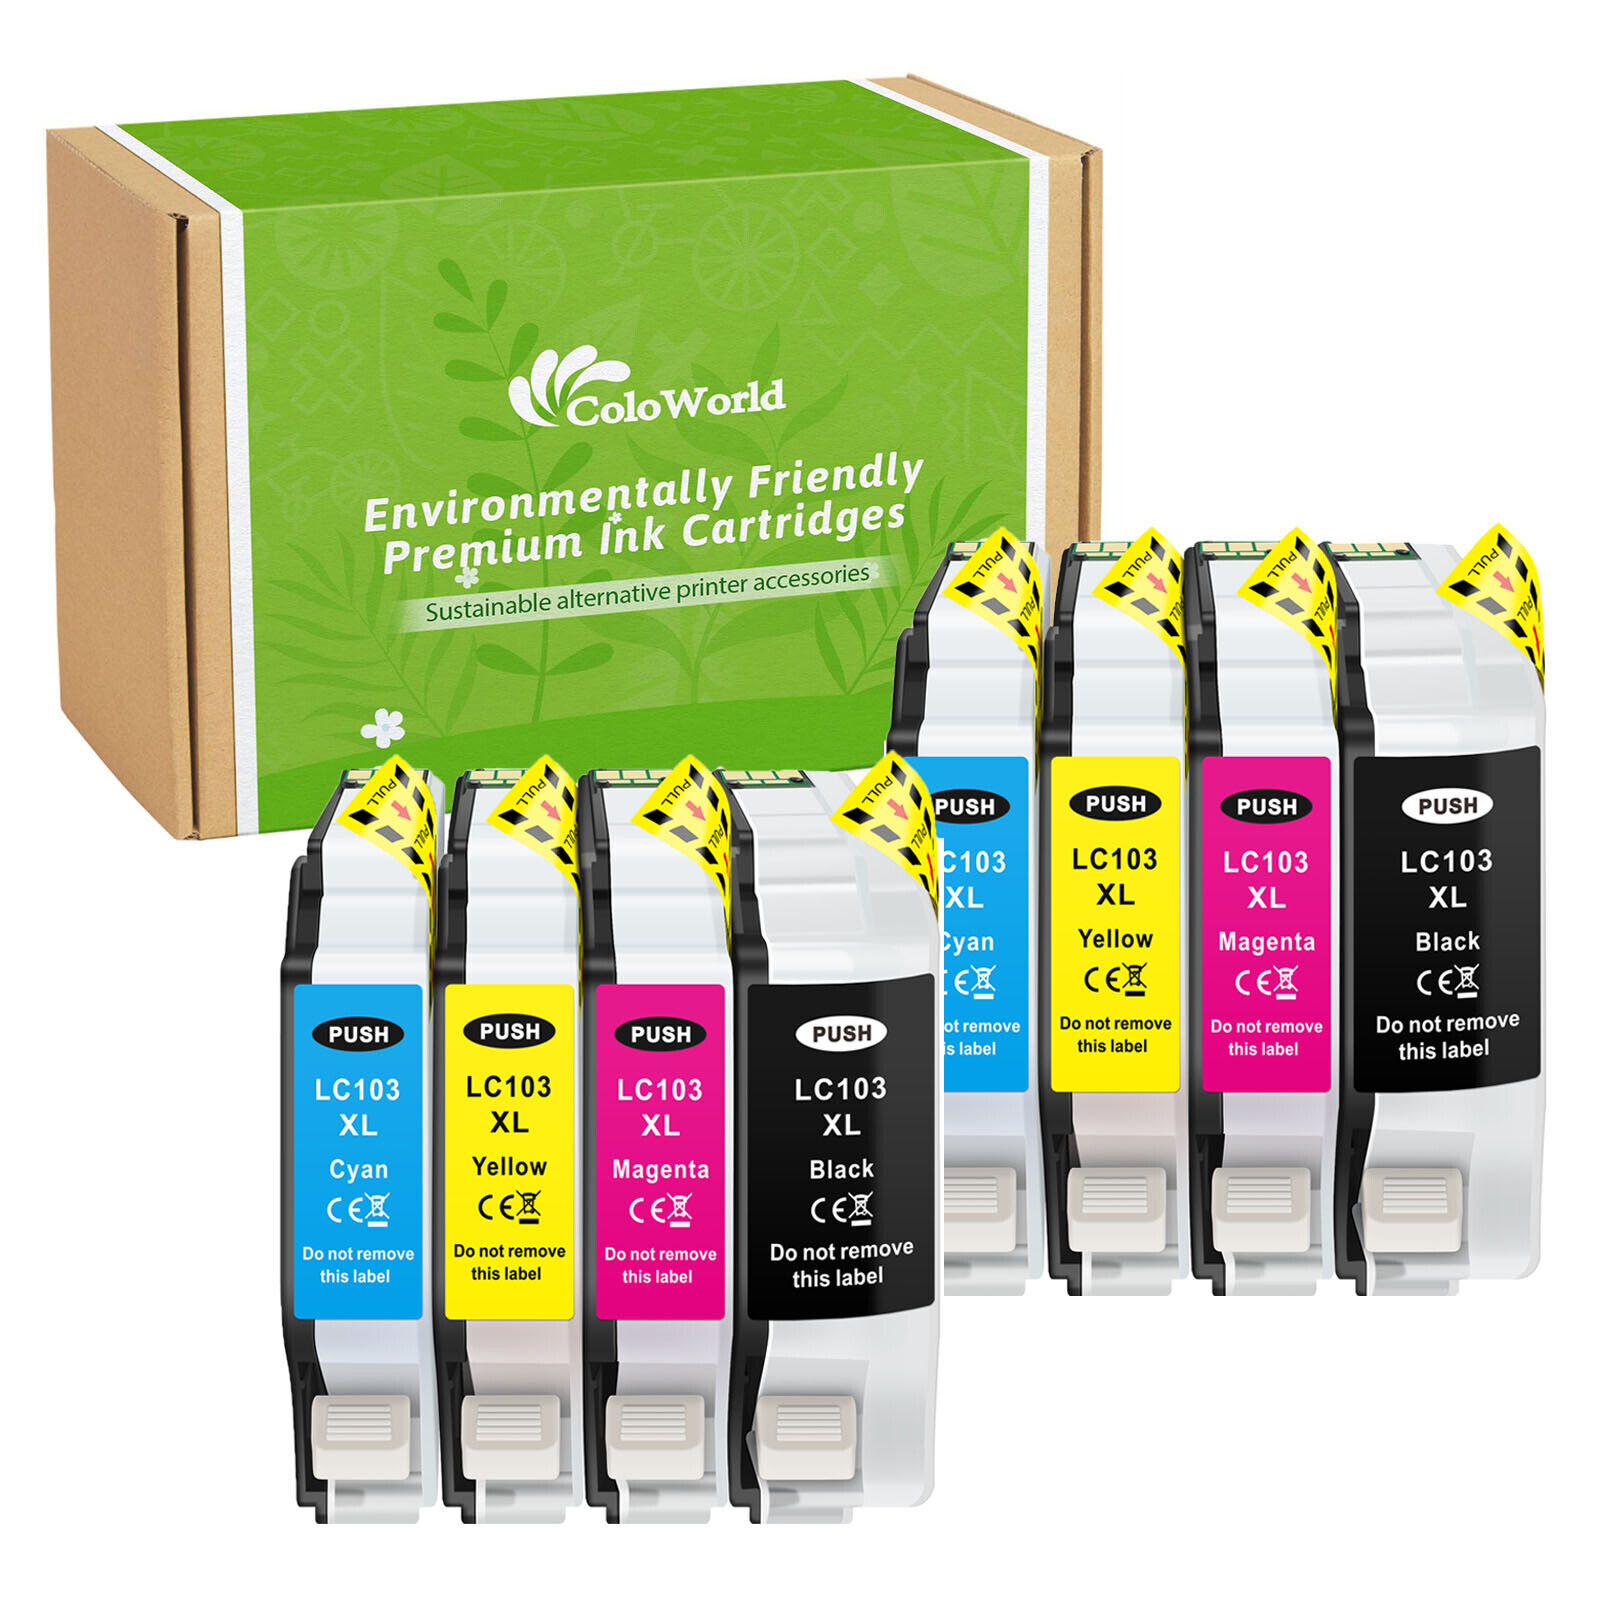 8PK LC-103XL LC-101 Ink Cartridges for Brother MFC-J870DW MFC-J470DW MFC-J475DW